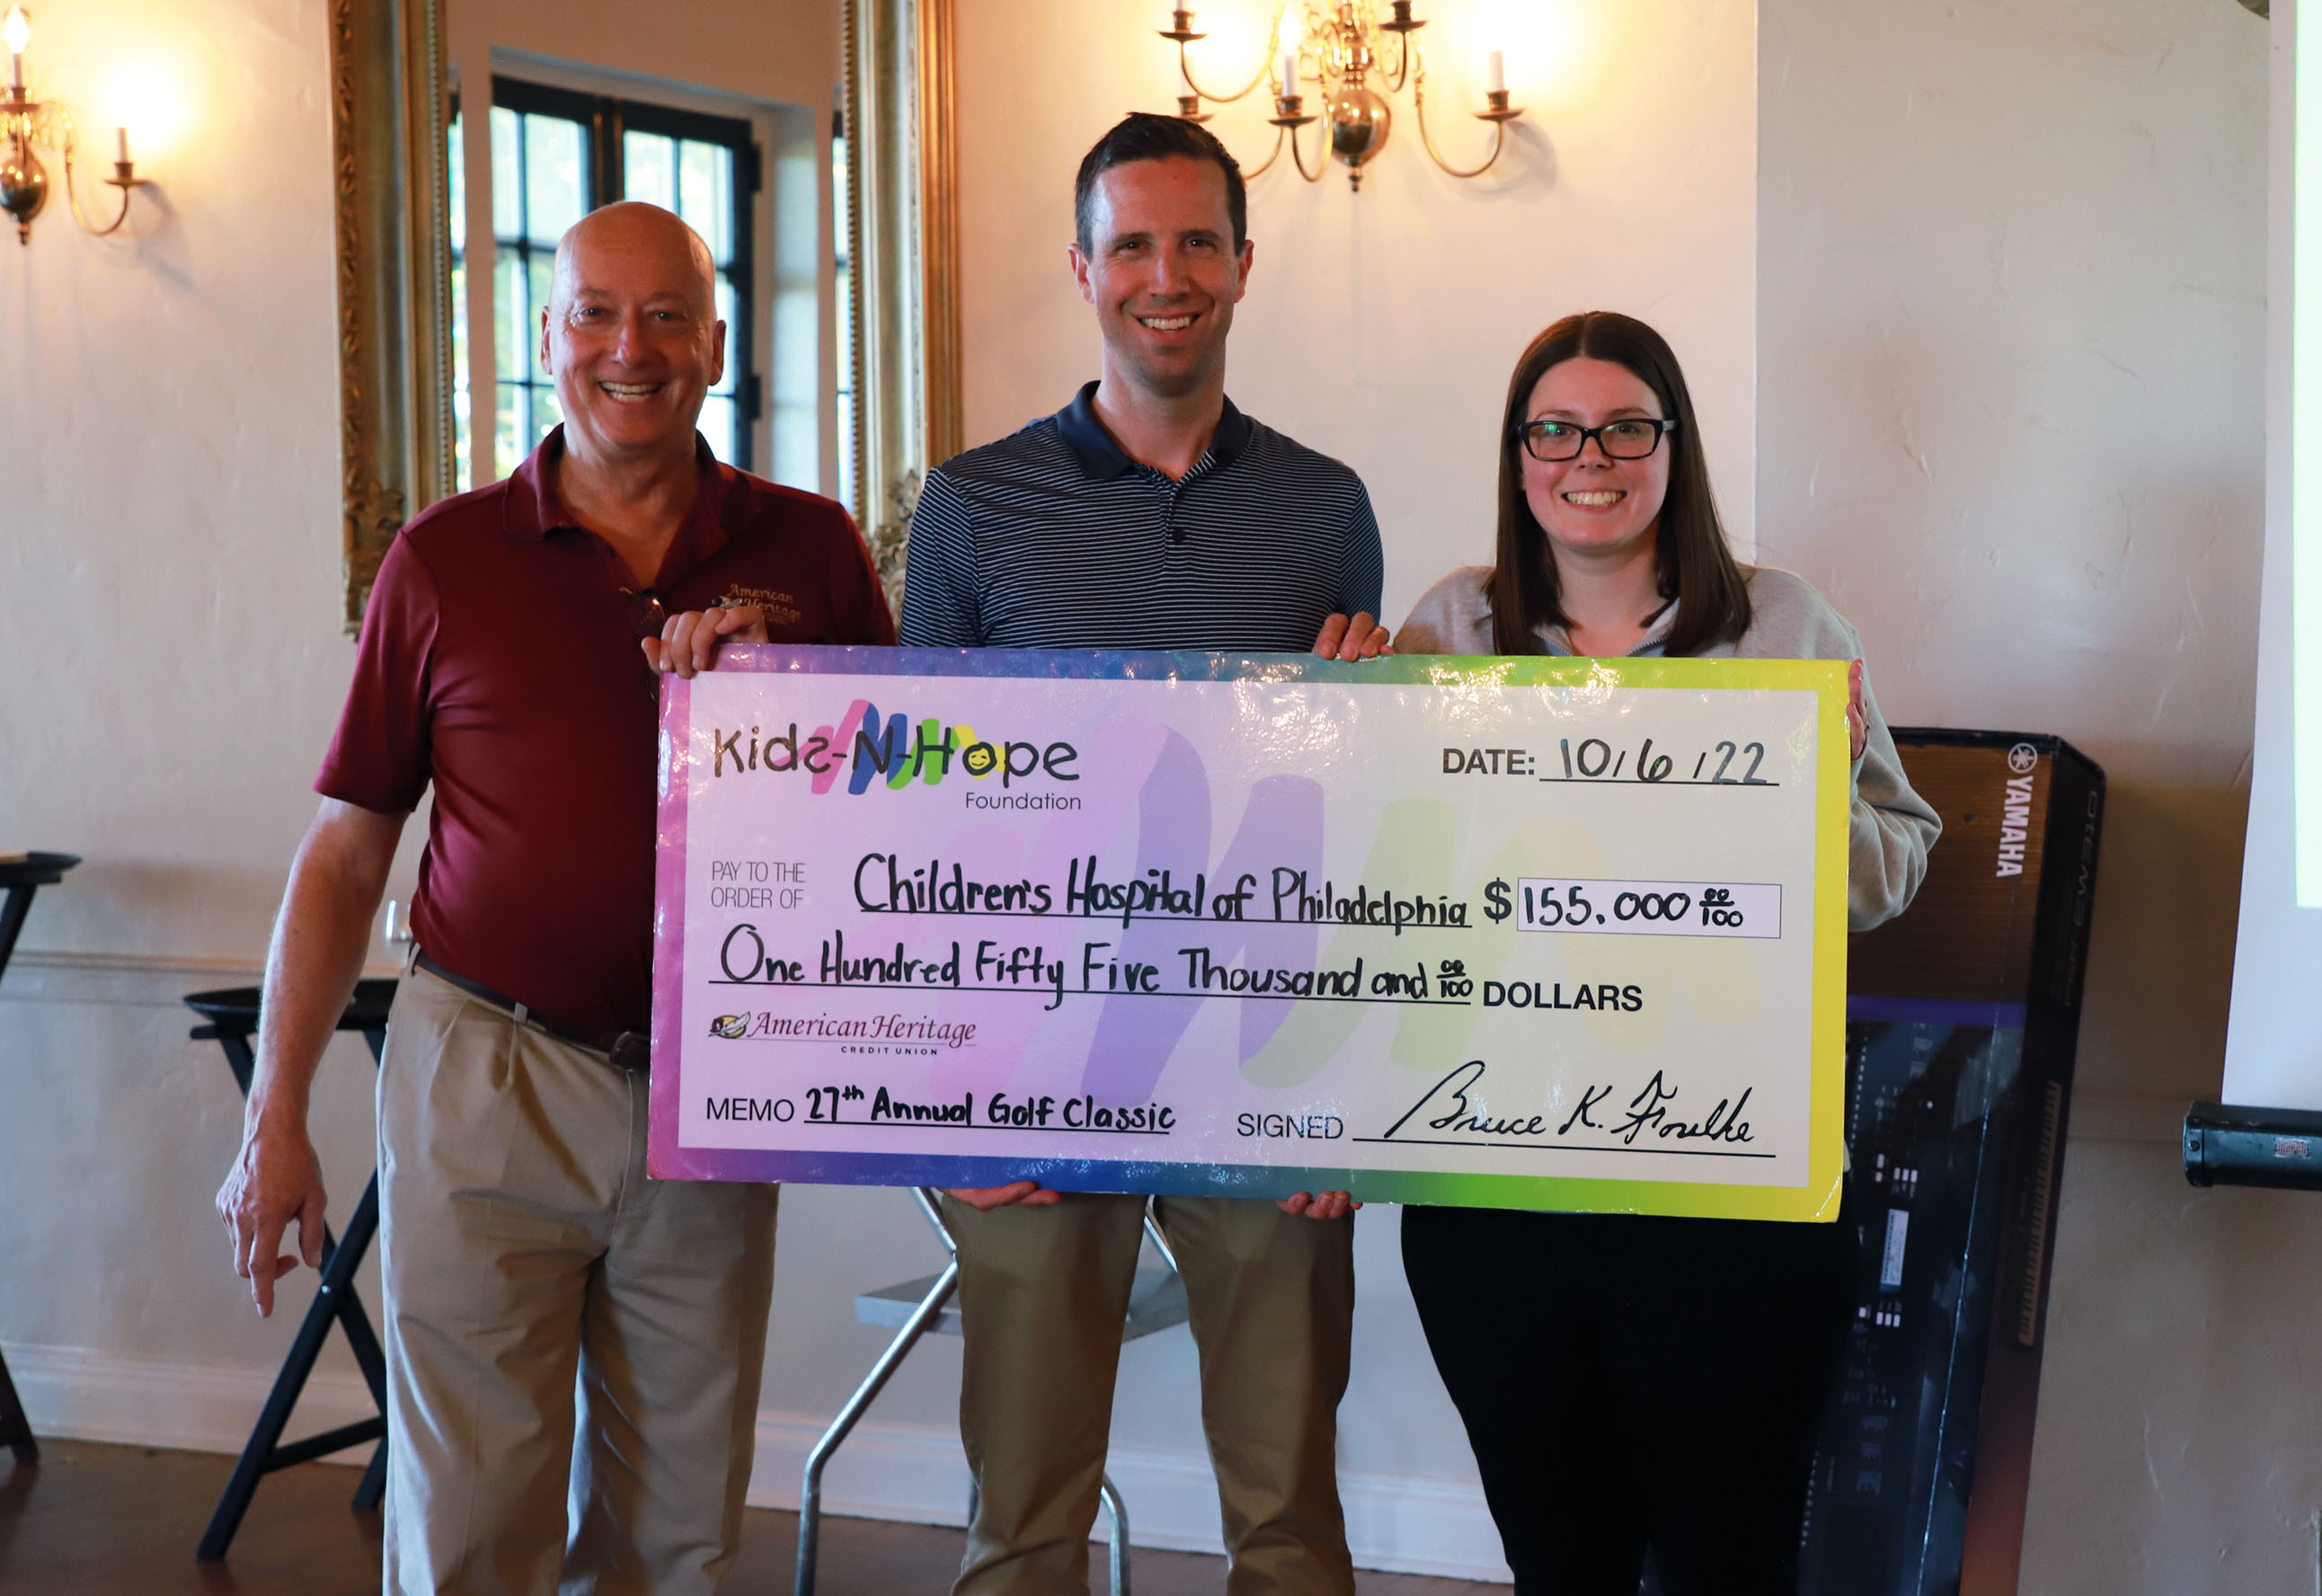 Foundation supporters and sponsors came out for a day of golf, skills contests, raffles and more to benefit the Kids-N-Hope Foundation, which raised over $155,000 for the Music Therapy program and child life services it supports.